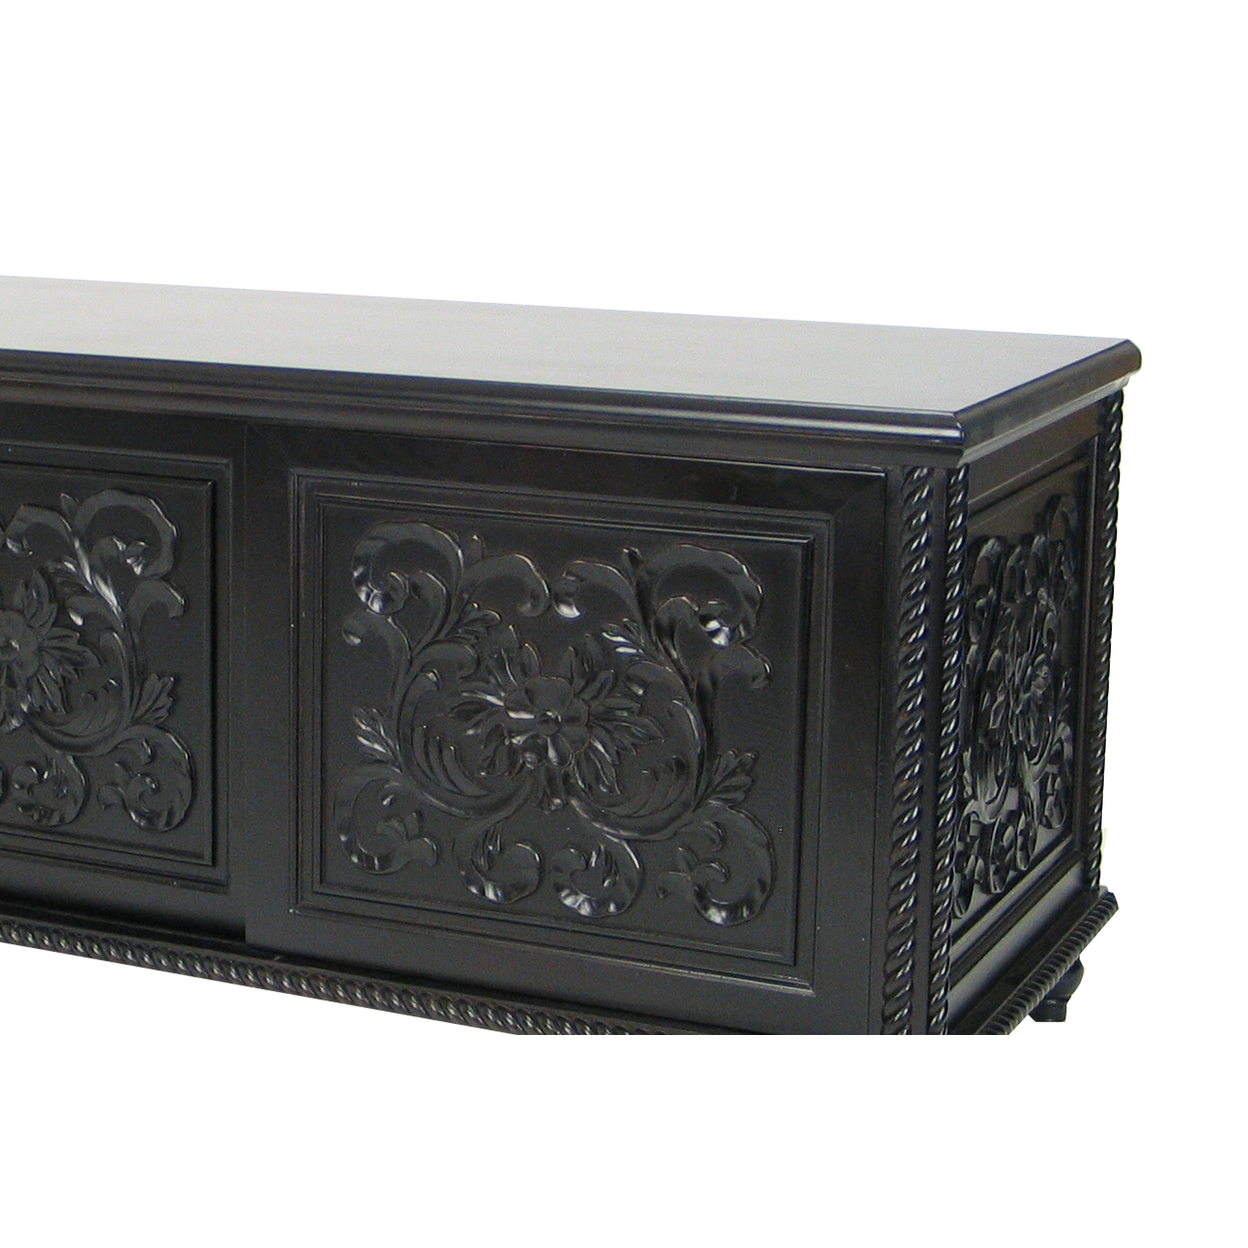 Hand Carved TV Console With Floral Motifs And 3 Sliding Doors, Black- Saltoro Sherpi